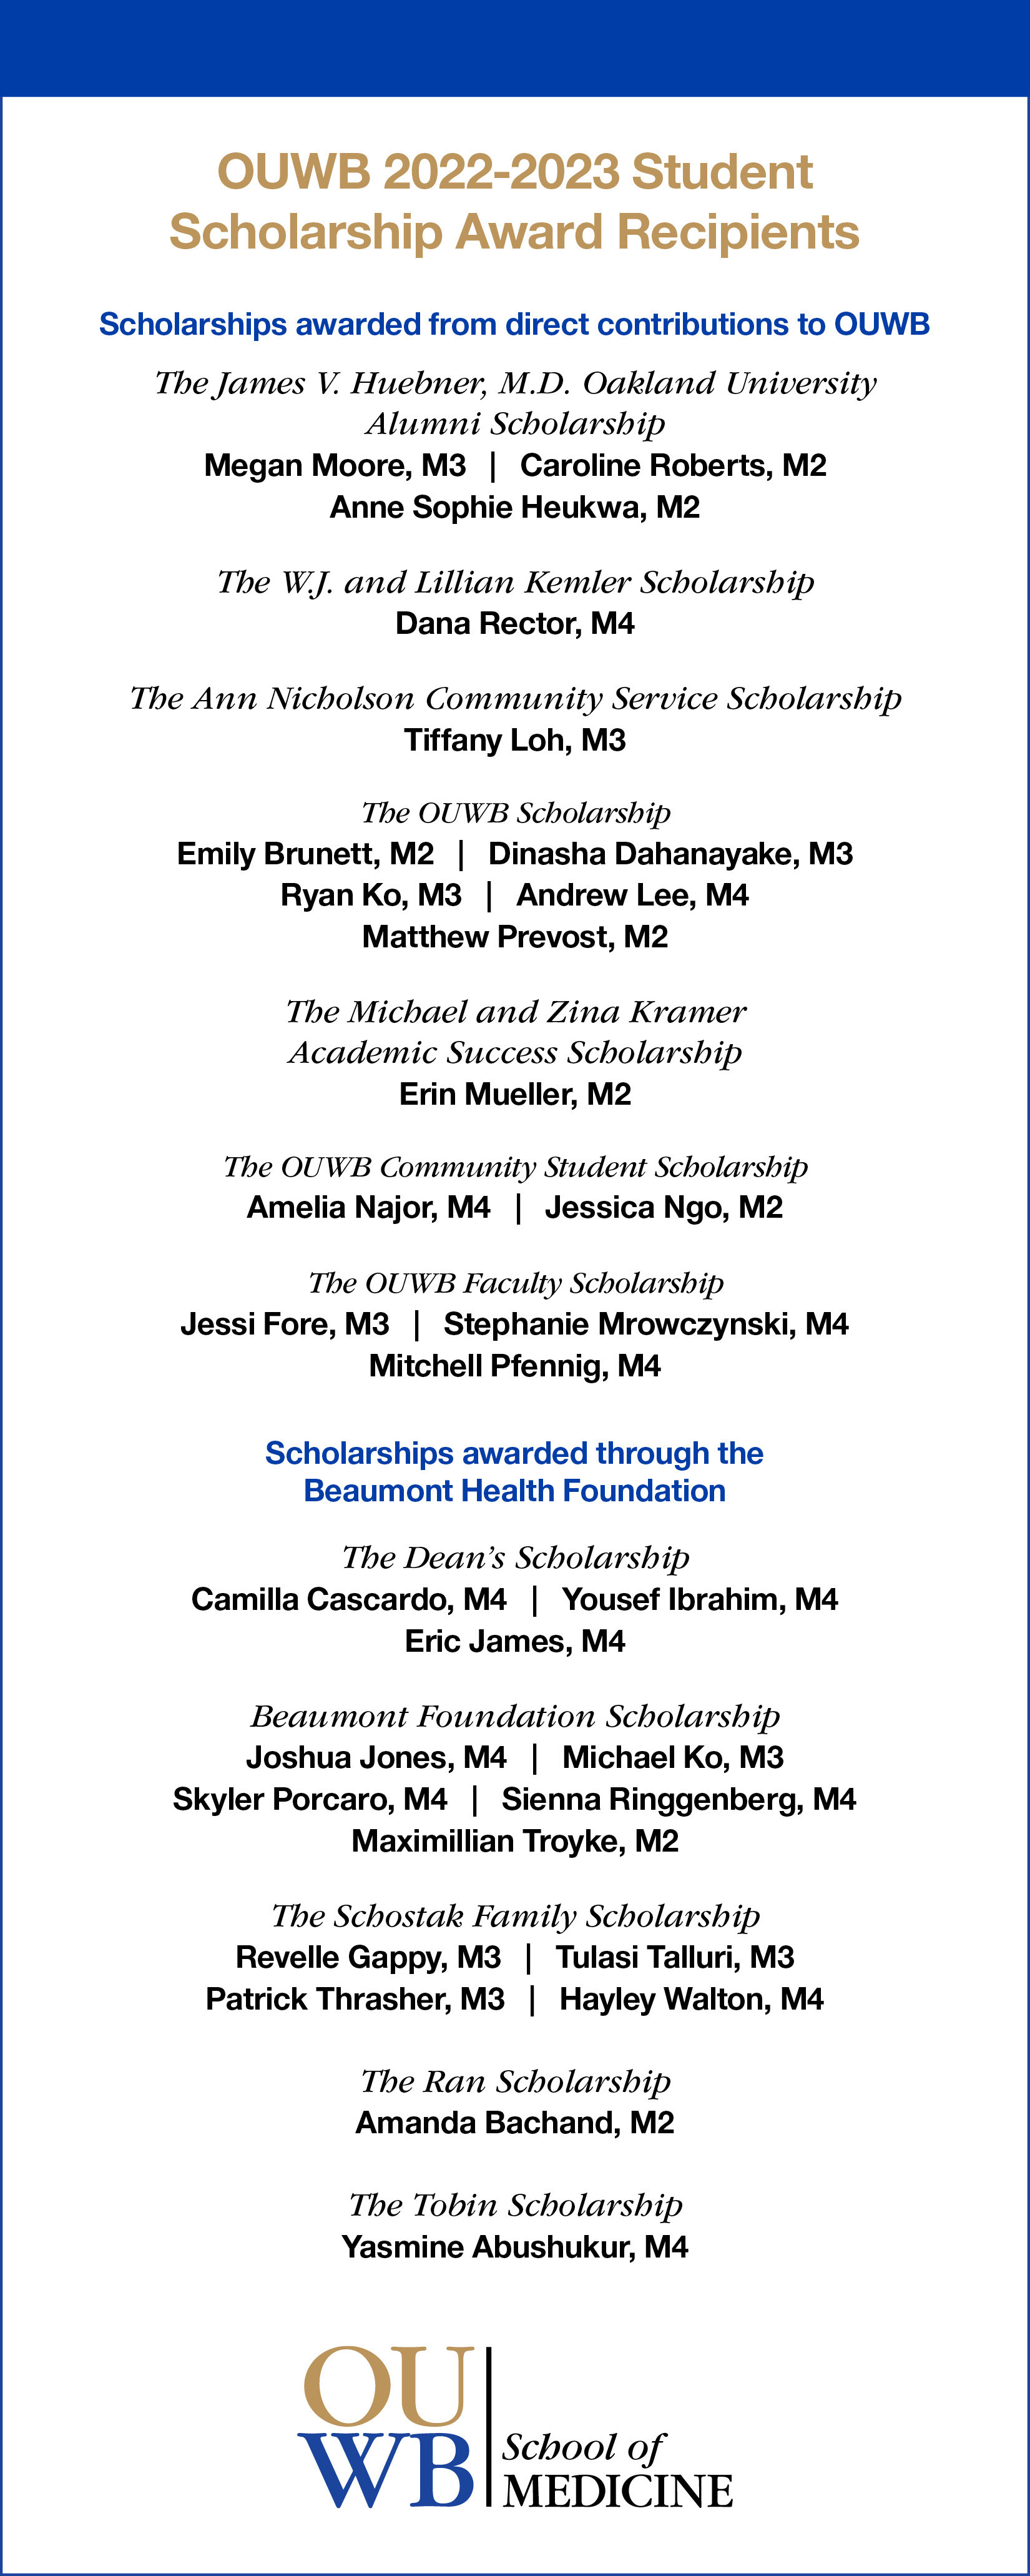 An image containing a list of scholarship recipients